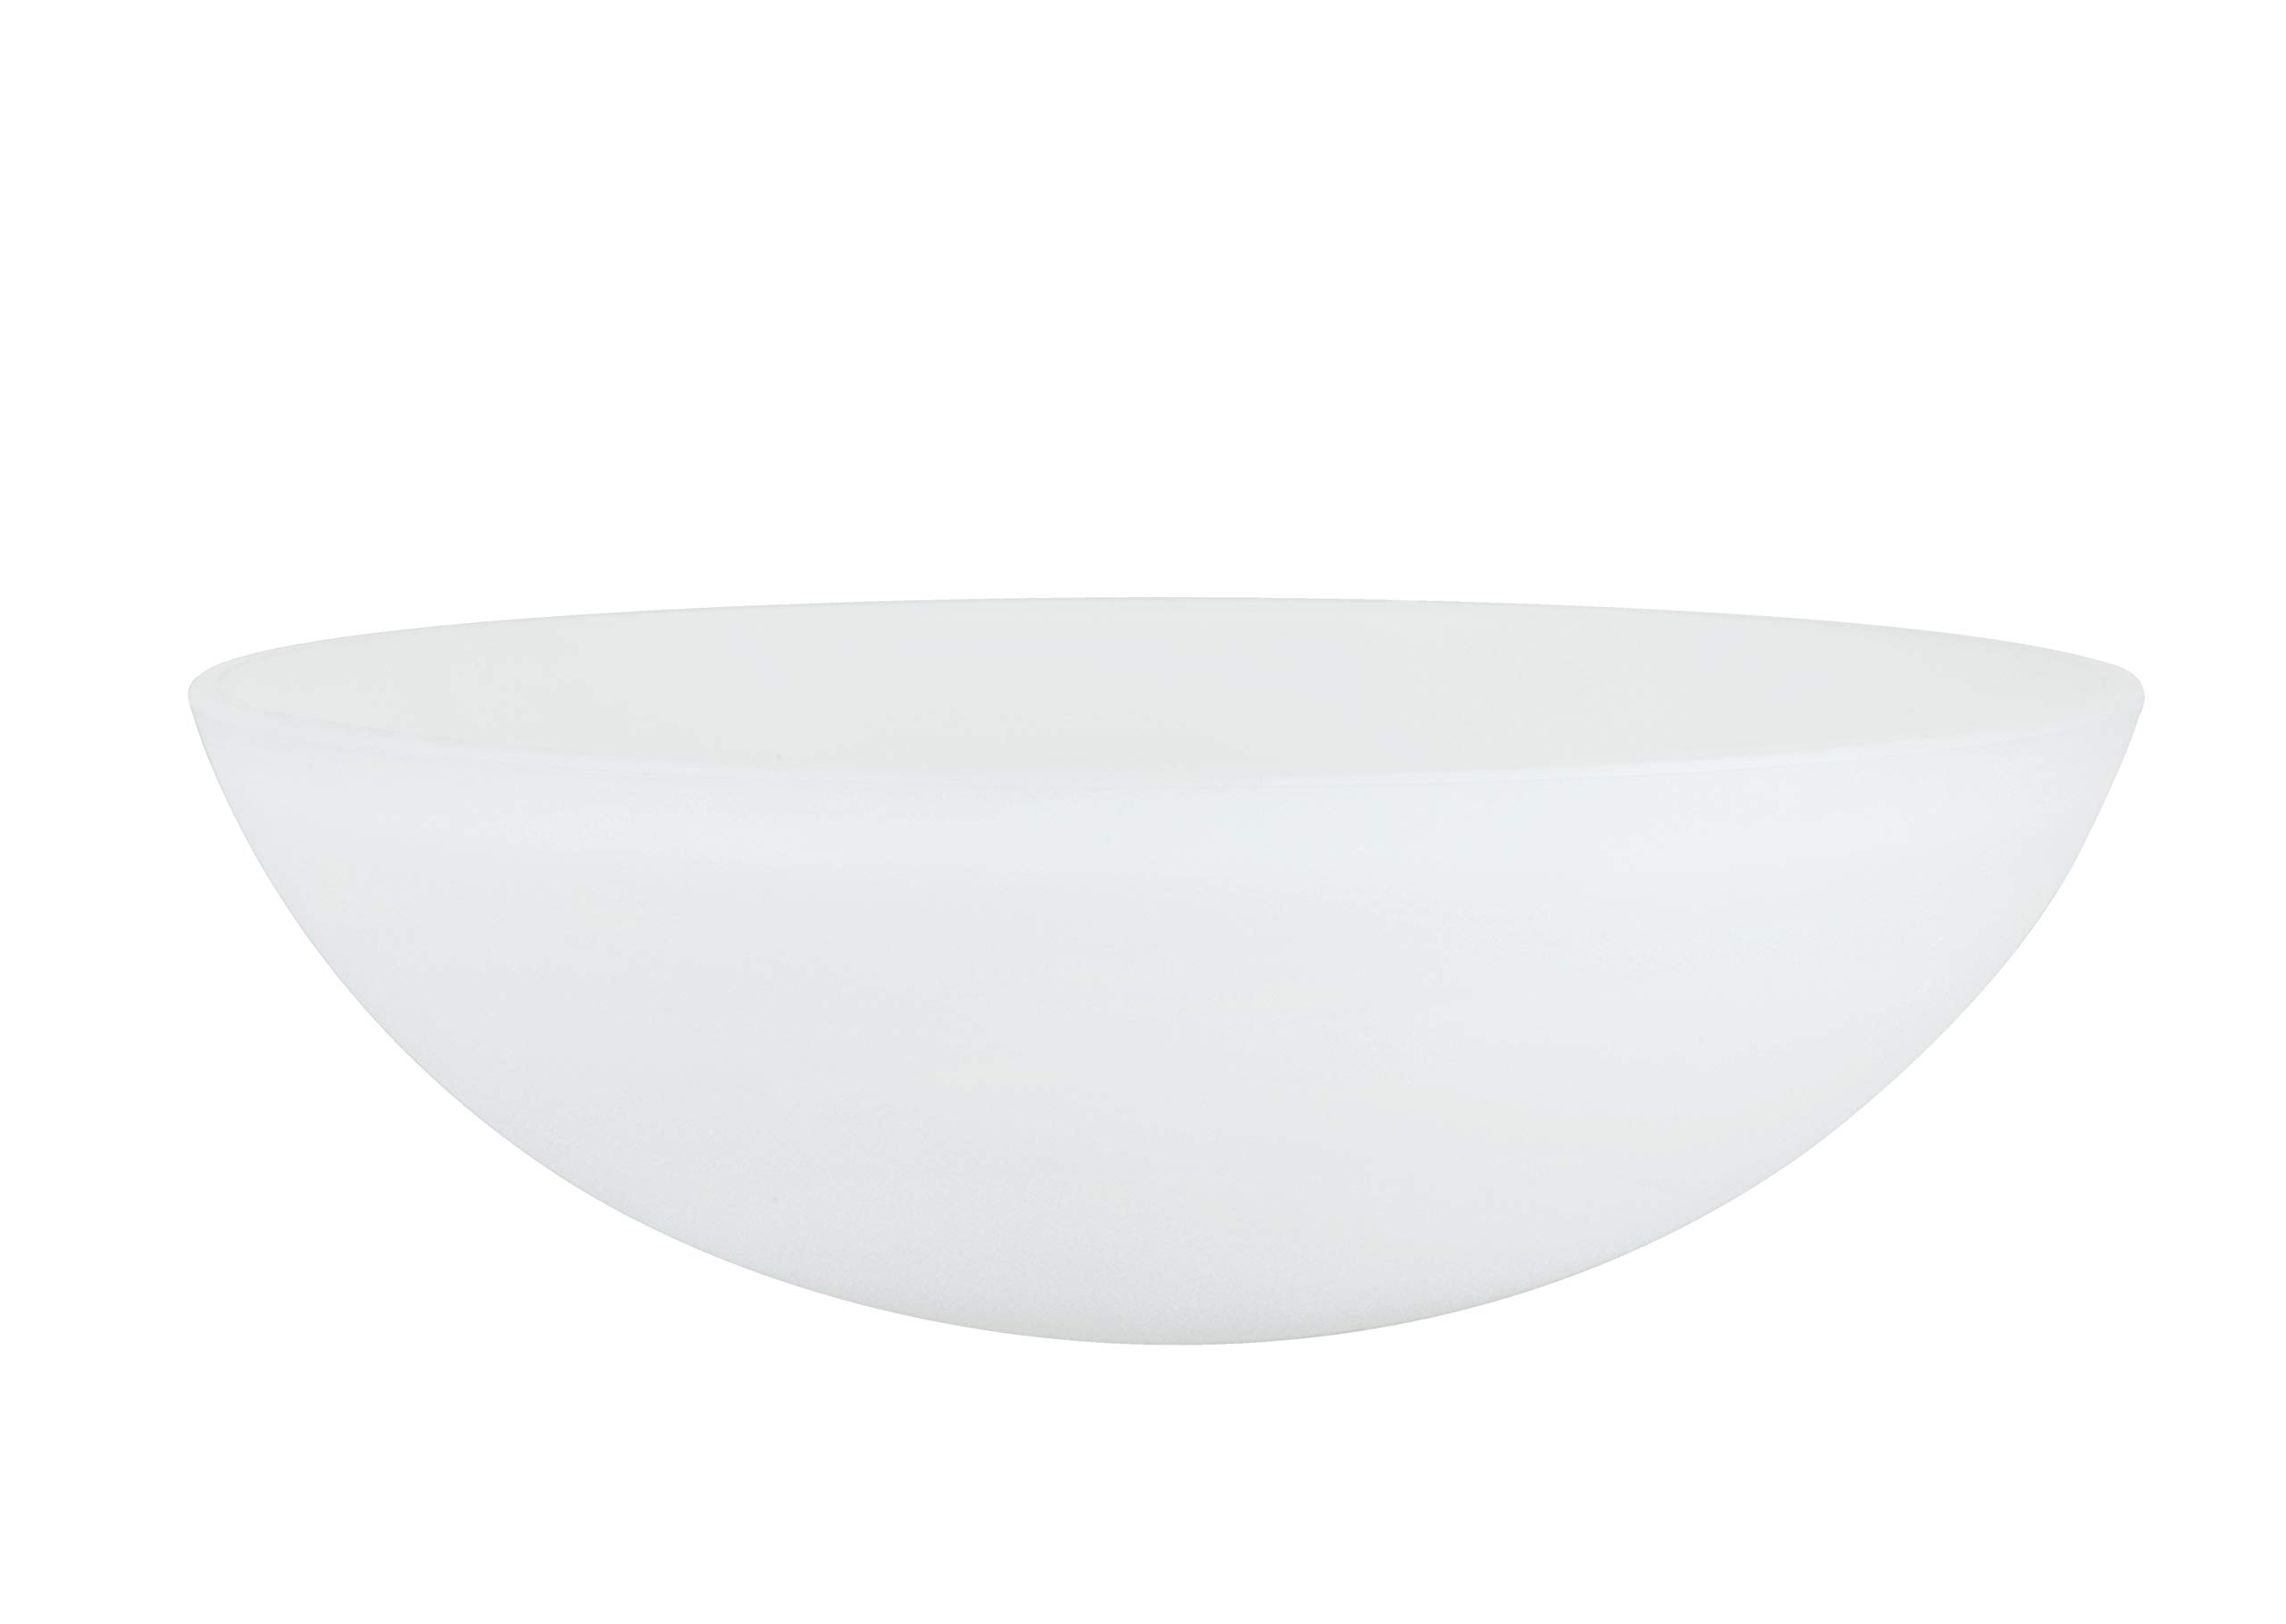 Aspen Creative Frosted 23098-01 Transitional Style Replacement Torchiere Glass Shade, 5-3/8" high x 15-5/8" Diameter